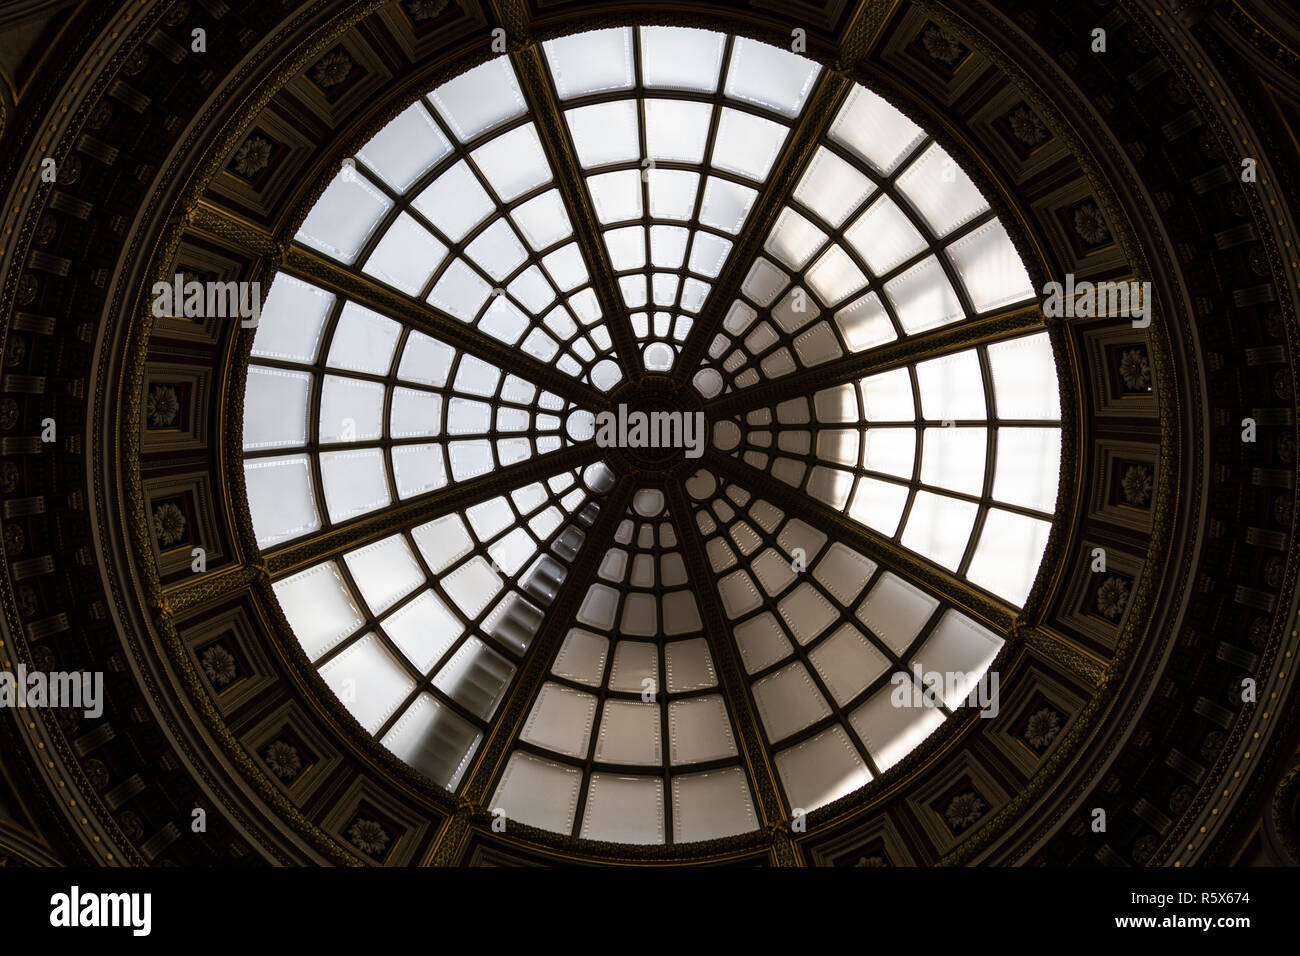 Dome of the National Gallery from the inside in London, England, United Kingdom Stock Photo